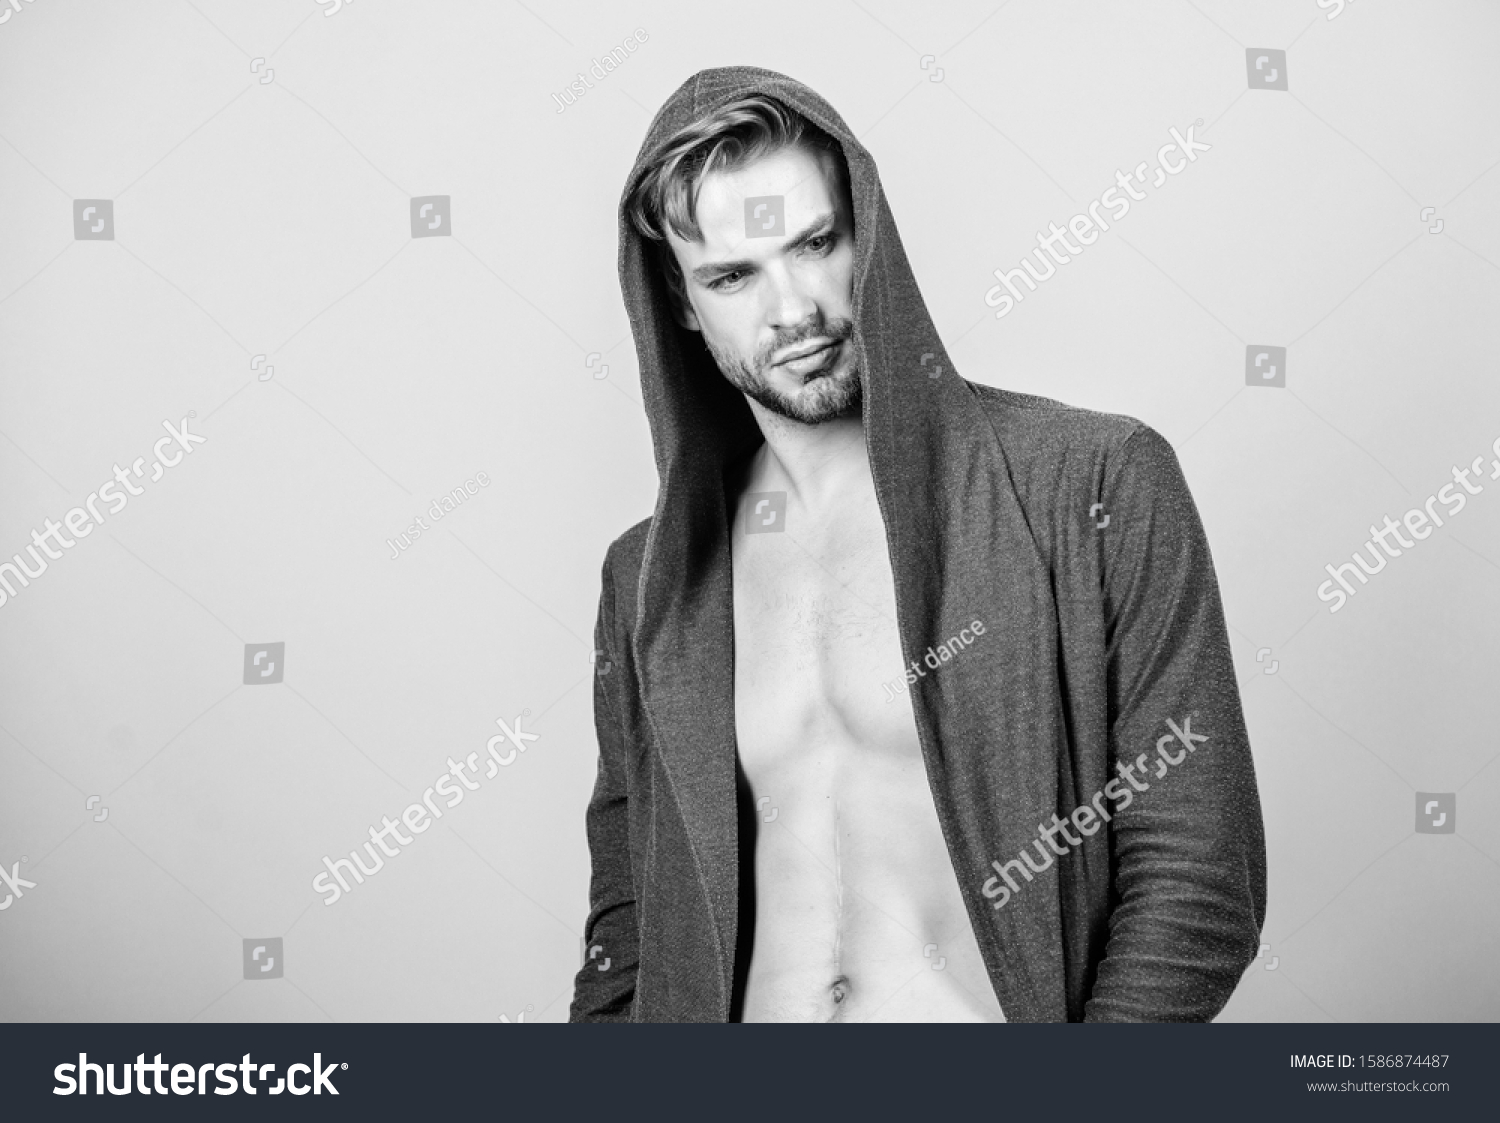 Masculinity concept. Masculinity and confidence. Man muscular torso wear hooded clothes. Unconventional but masculine look. Brute masculinity extremely commanding looking conventionally handsome. #1586874487